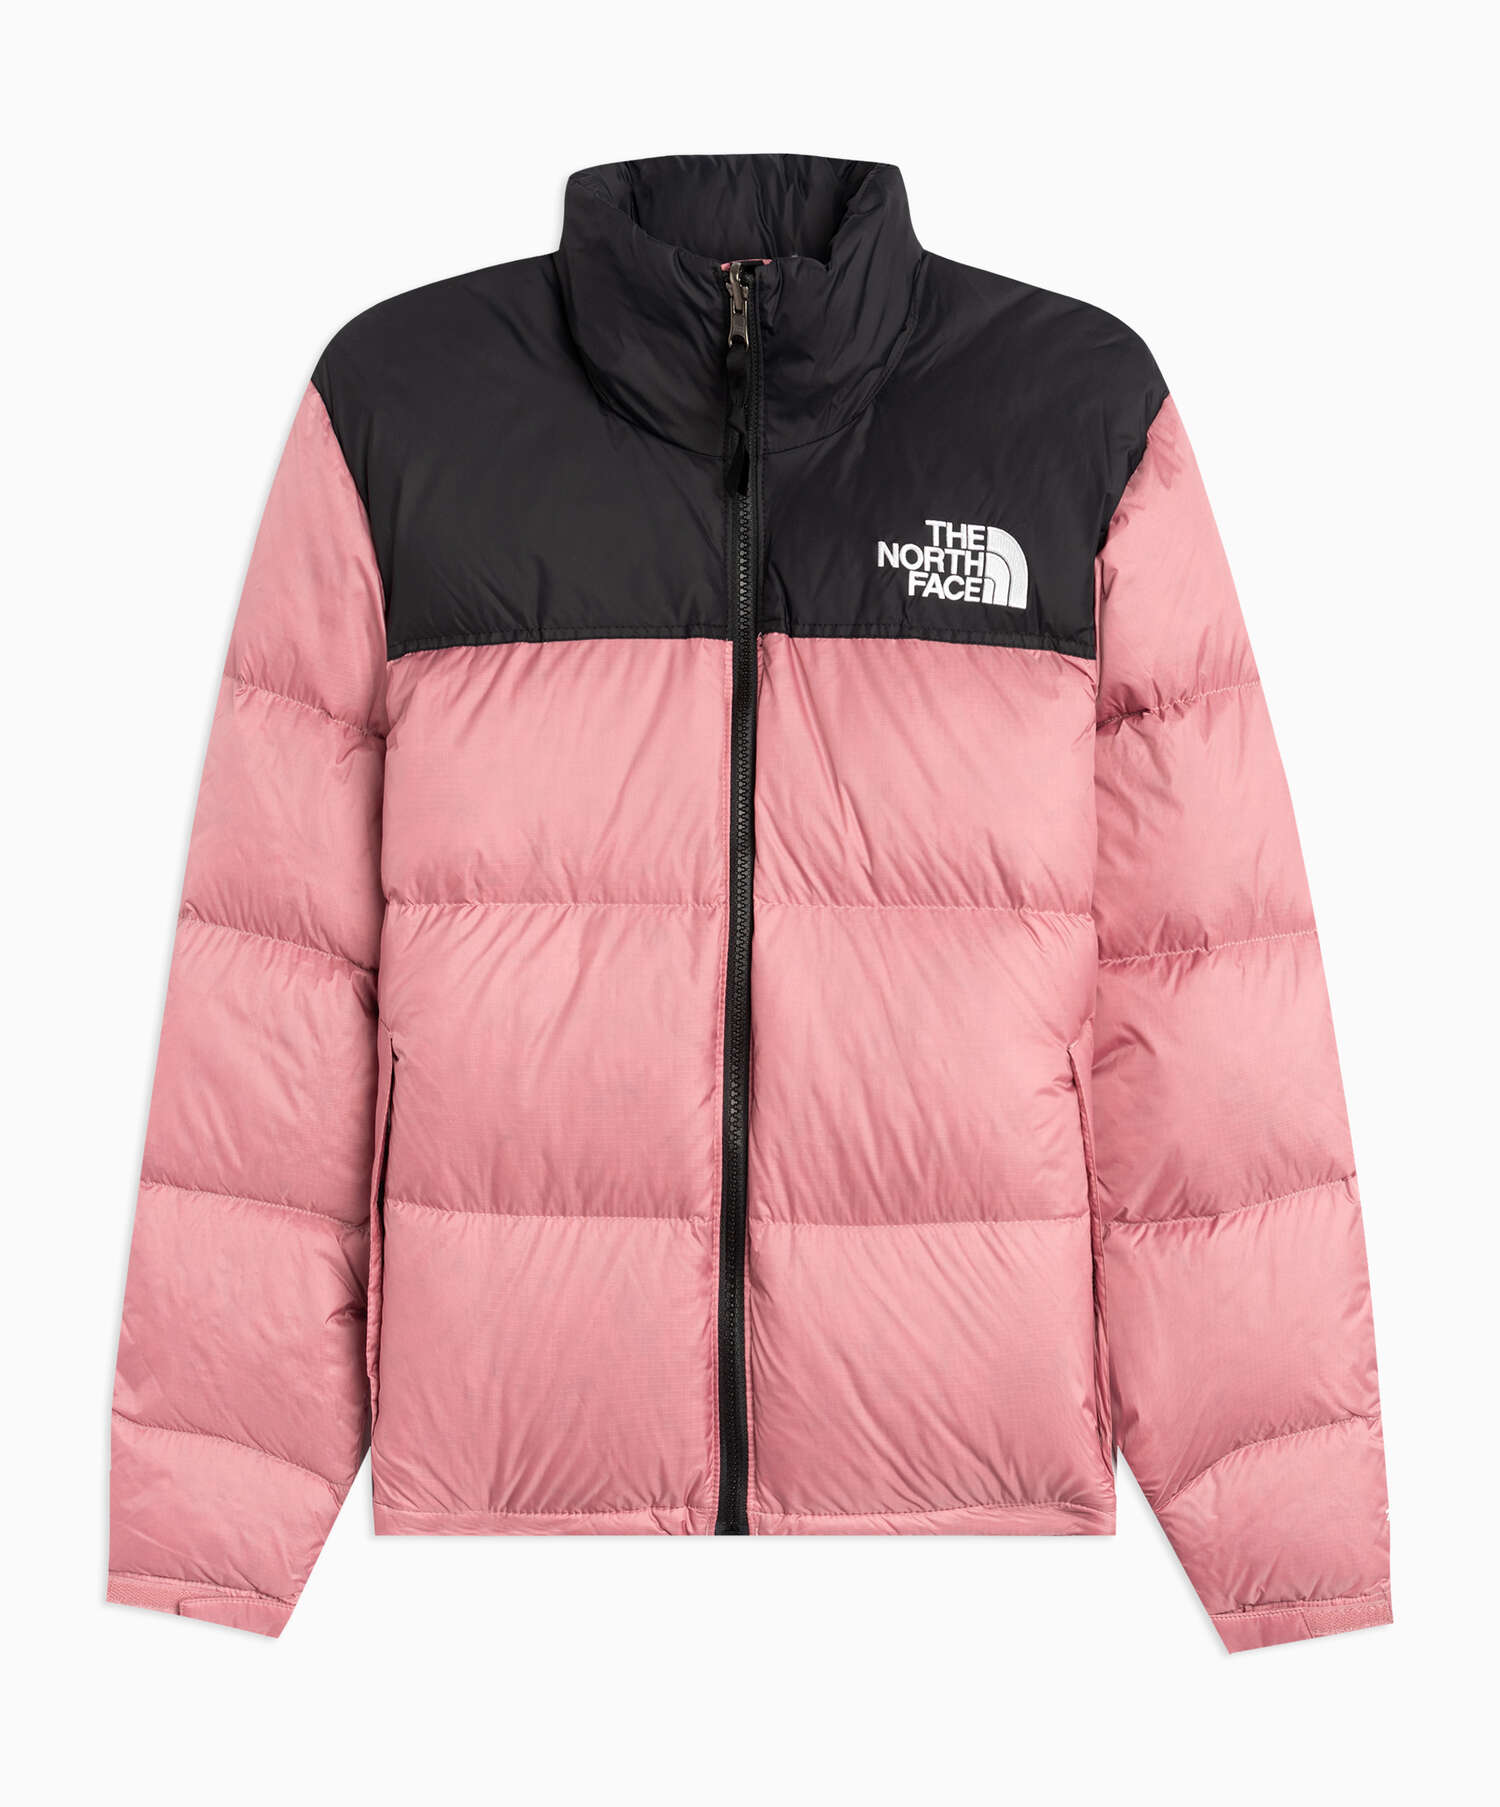 The North Face Retro Nuptse 1996 Women S Jacket Multi Nf0a3xeorn2 Buy Online At Footdistrict